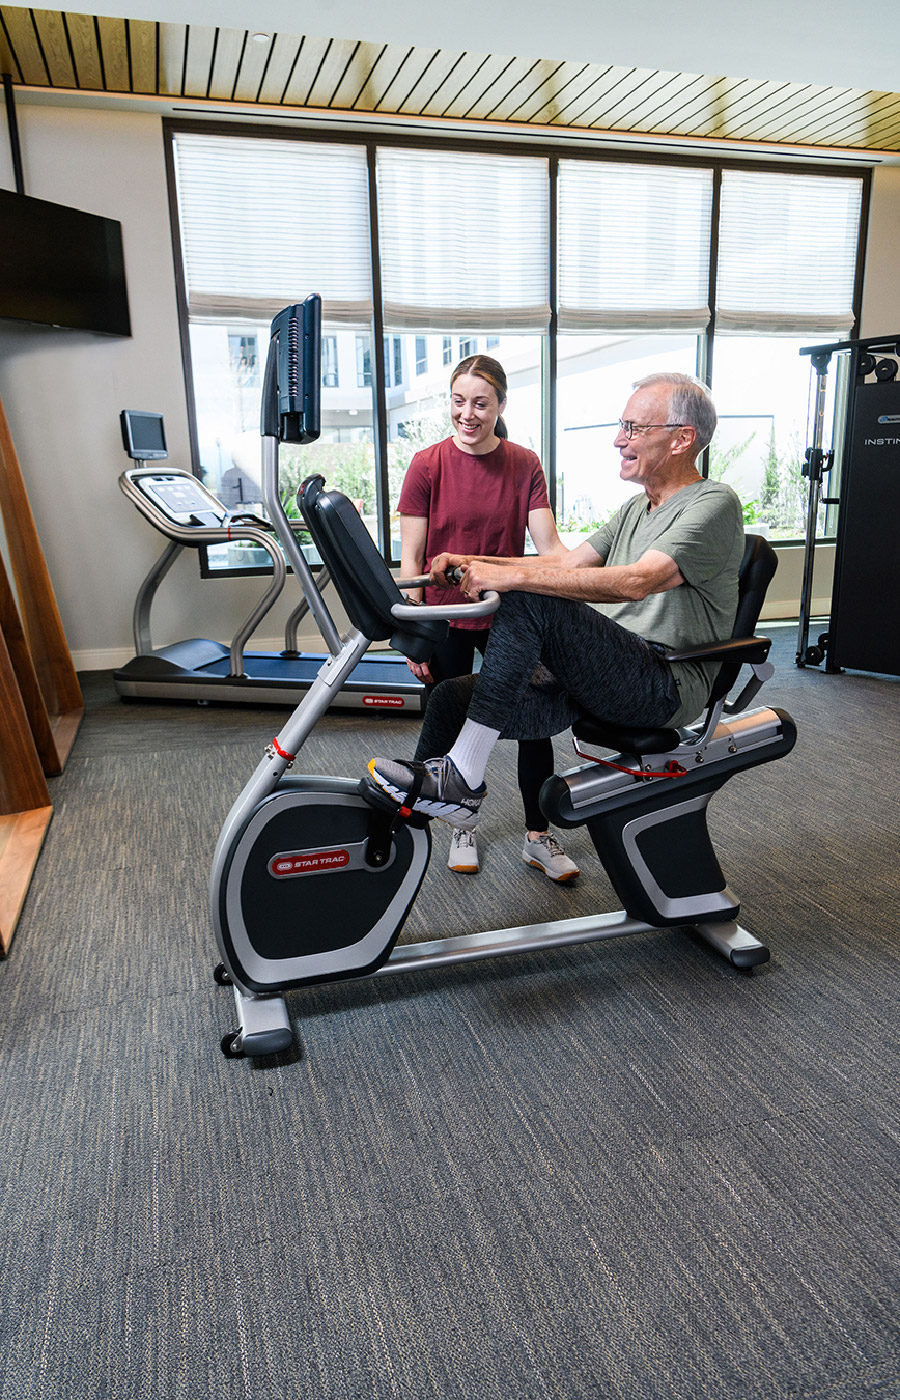 A resident is using a fitness machine.